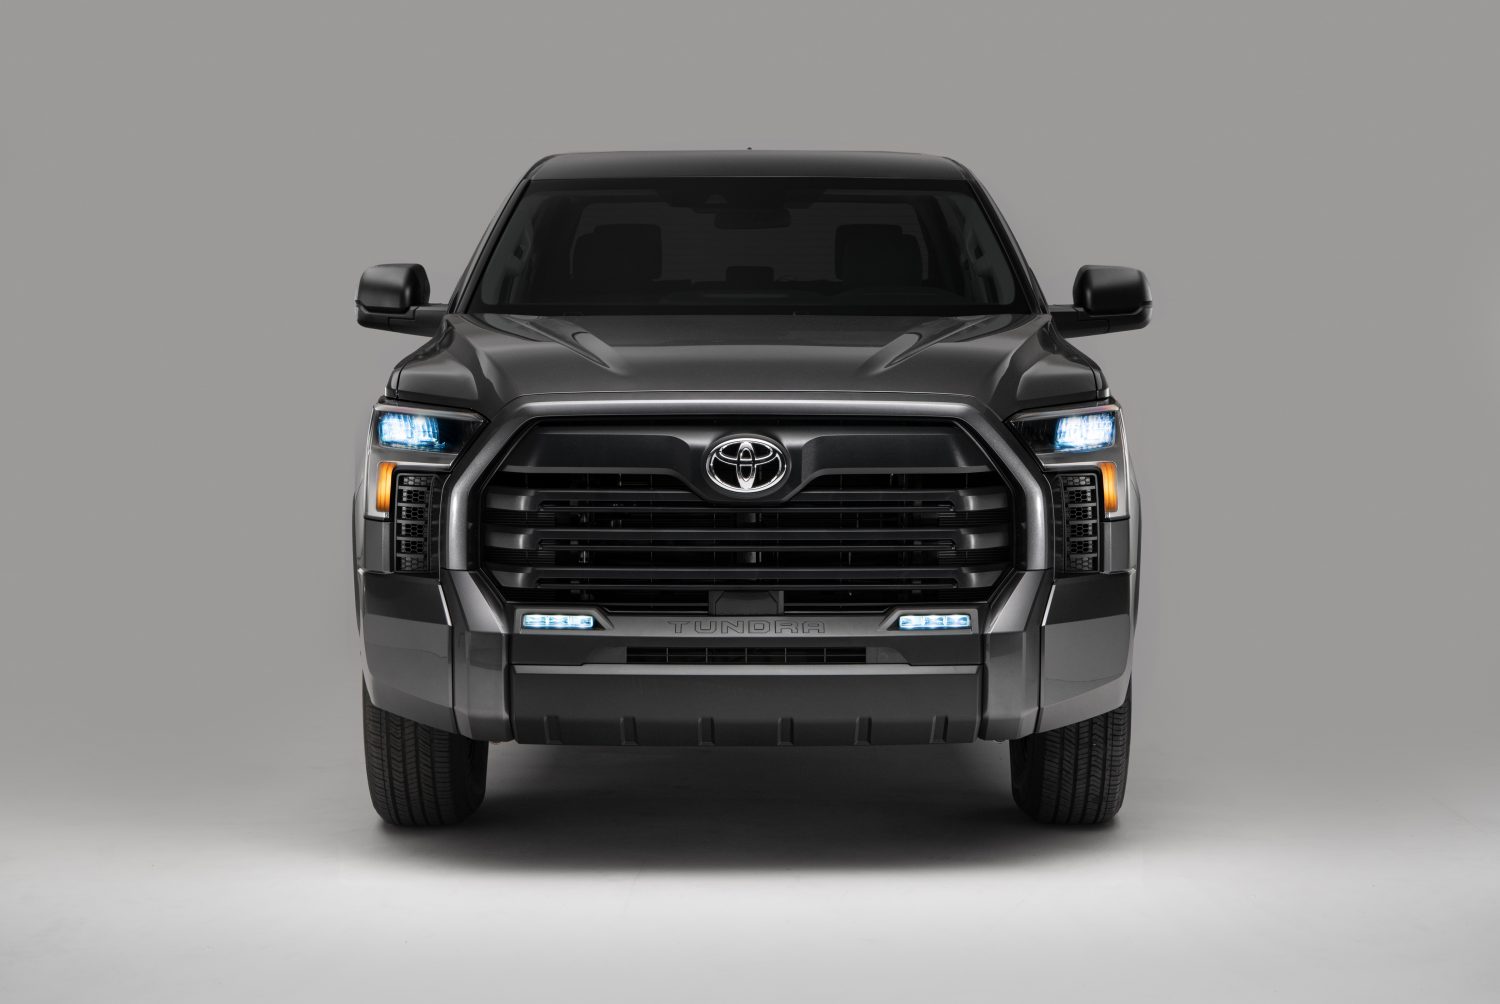 Promo photo of the blacked out grille of the 2023 Toyota Tundra SR5 pickup truck with the SX appearance package.